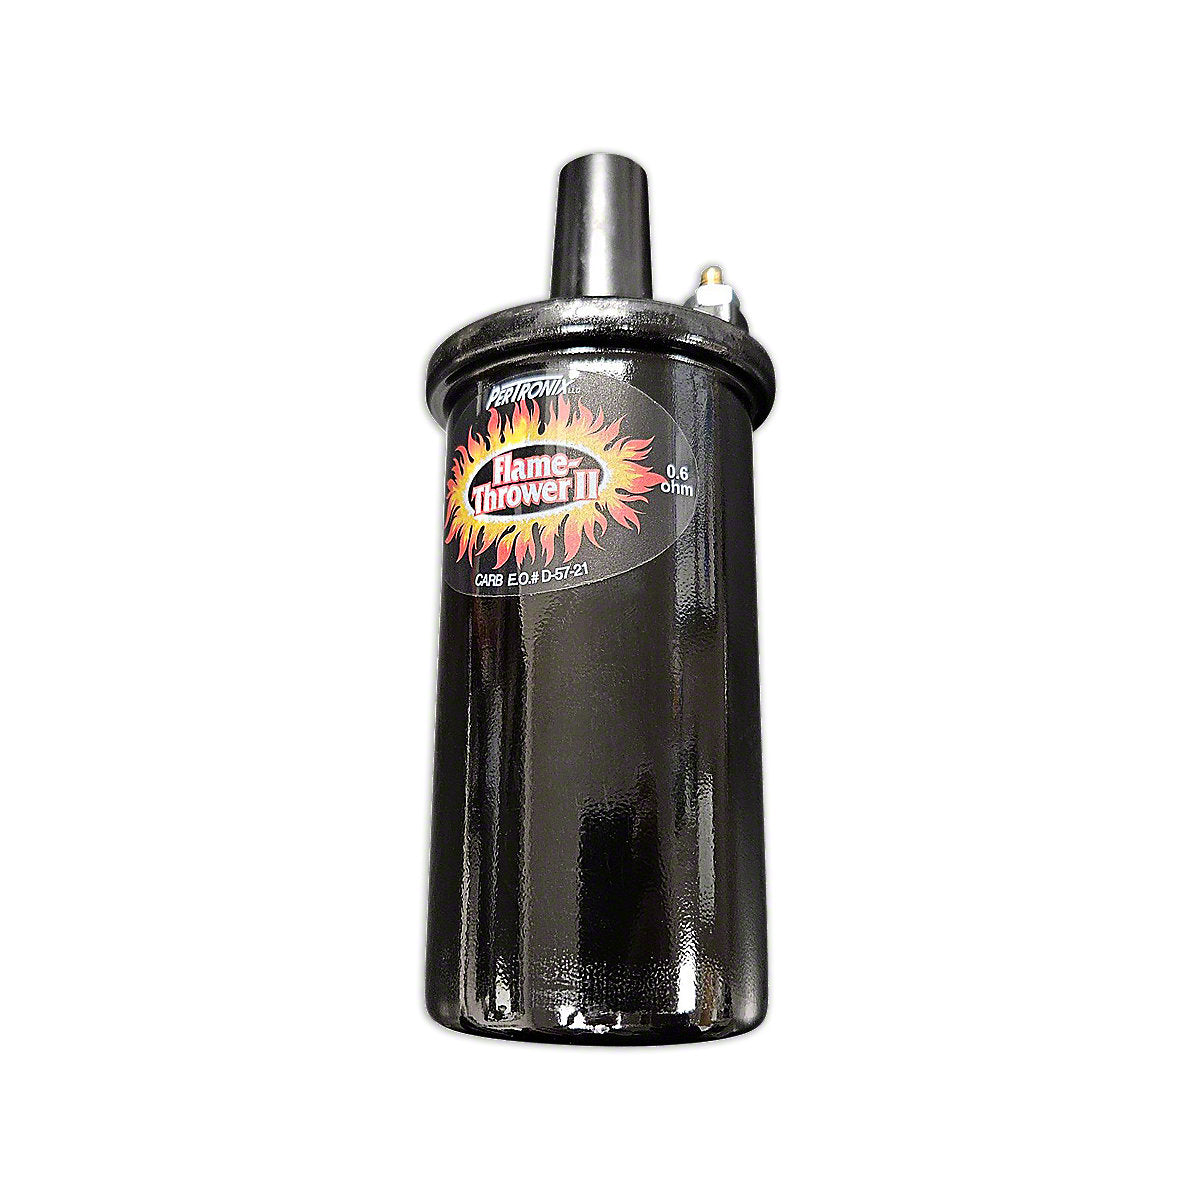 HOT (45,000-volts) Distributor Coil Flame-Thrower II Fits Case